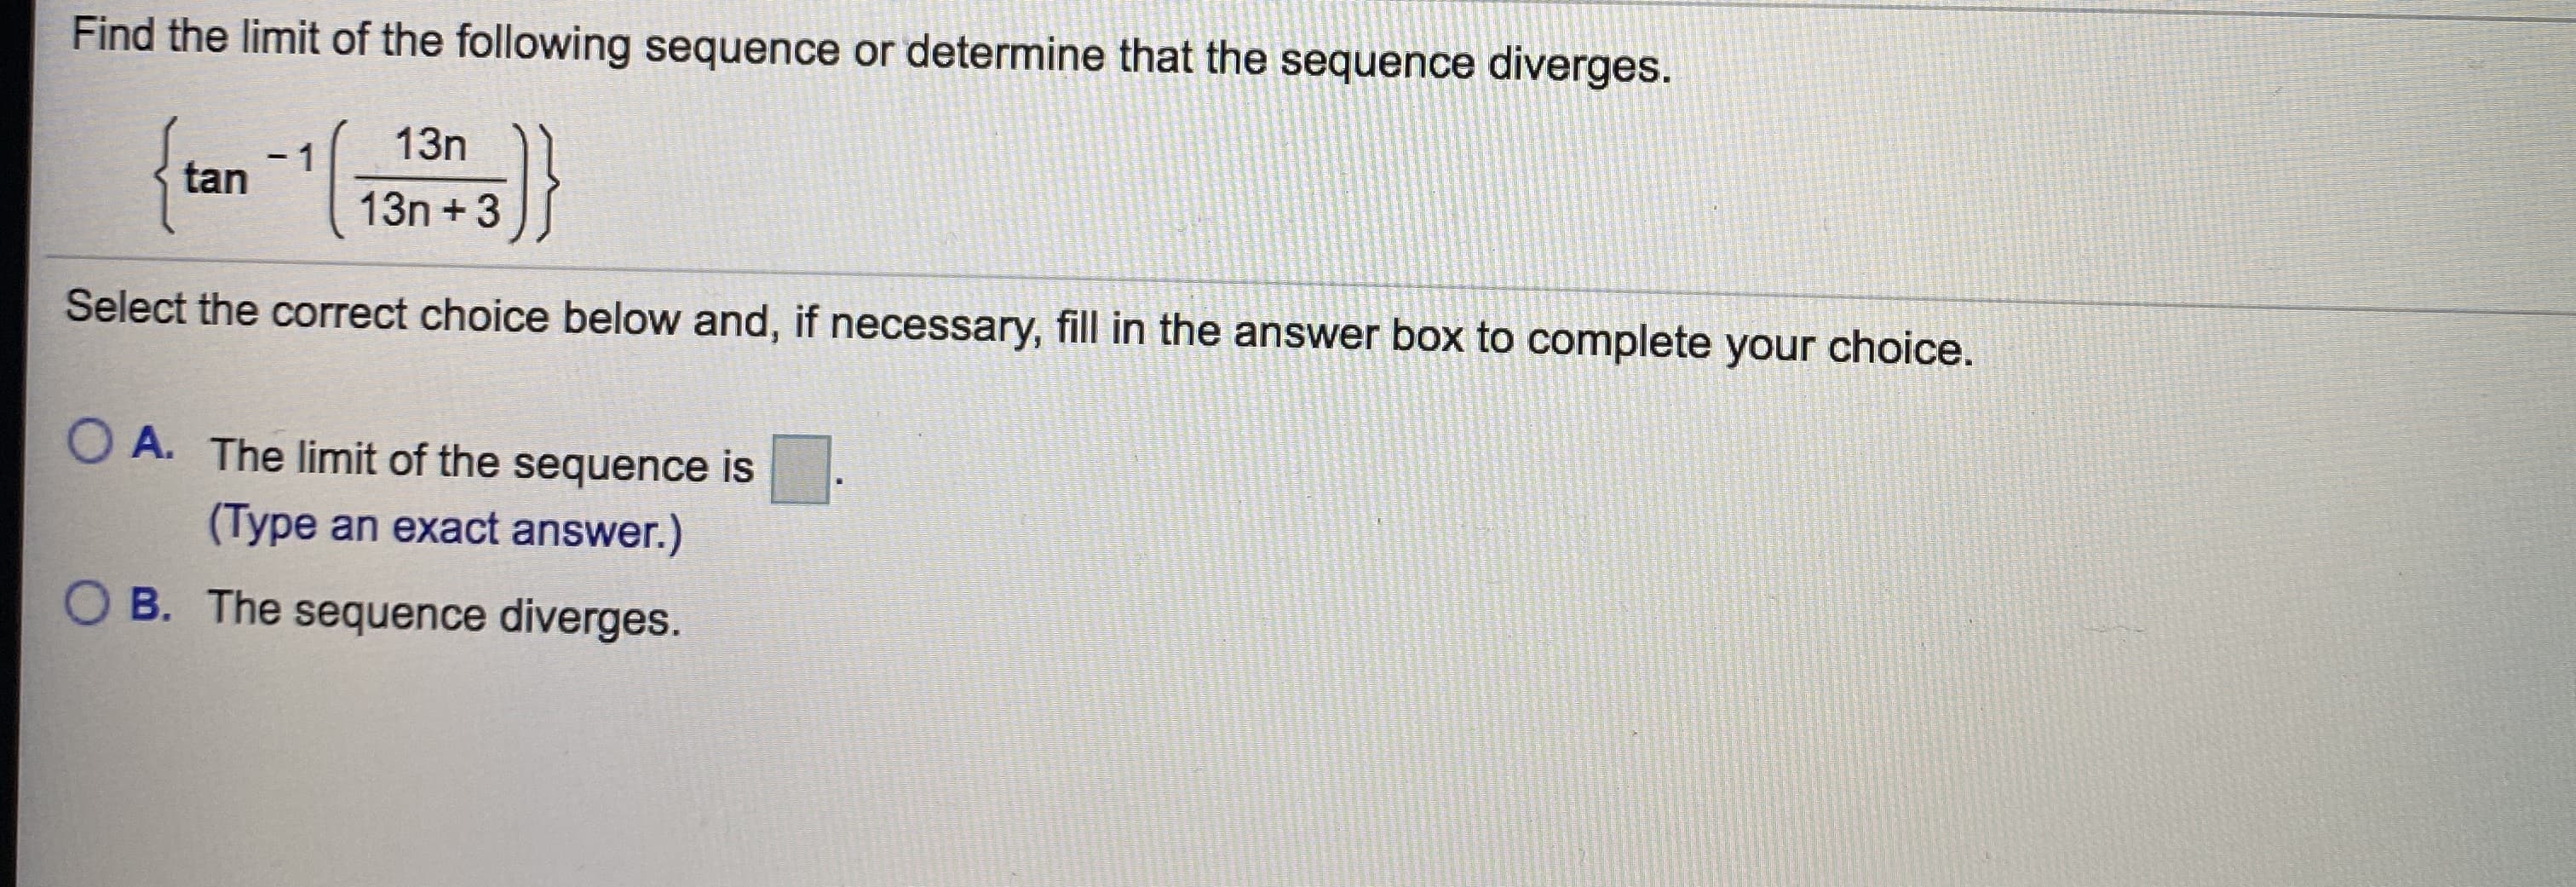 Find the limit of the following sequence or determine that the sequence diverges.
}
13n
1
tan
13n + 3
Select the correct choice below and, if necessary, fill in the answer box to complete your choice.
O A. The limit of the sequence is
(Type an exact answer.)
B. The sequence diyerges.
